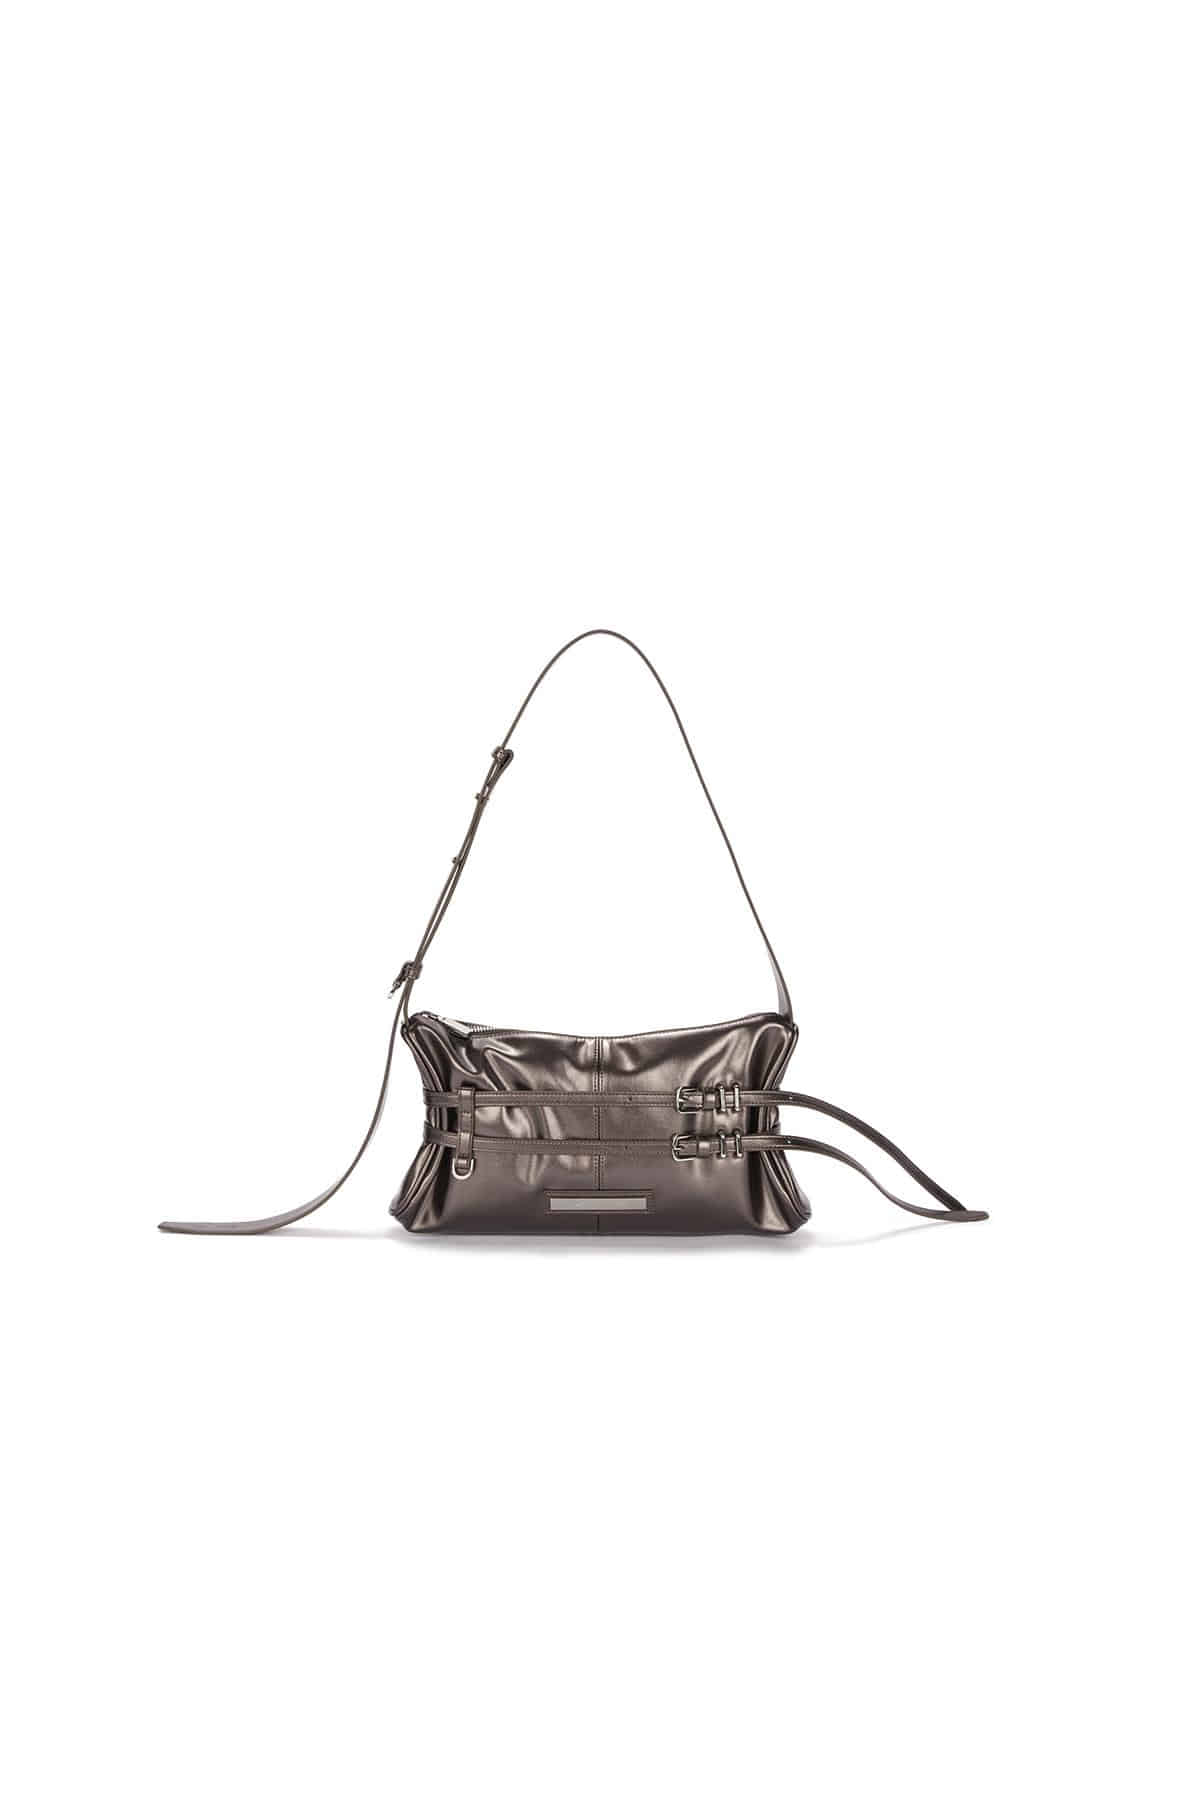 DOUBLE BELTED STRAP MINI BAG IN DARK BROWN